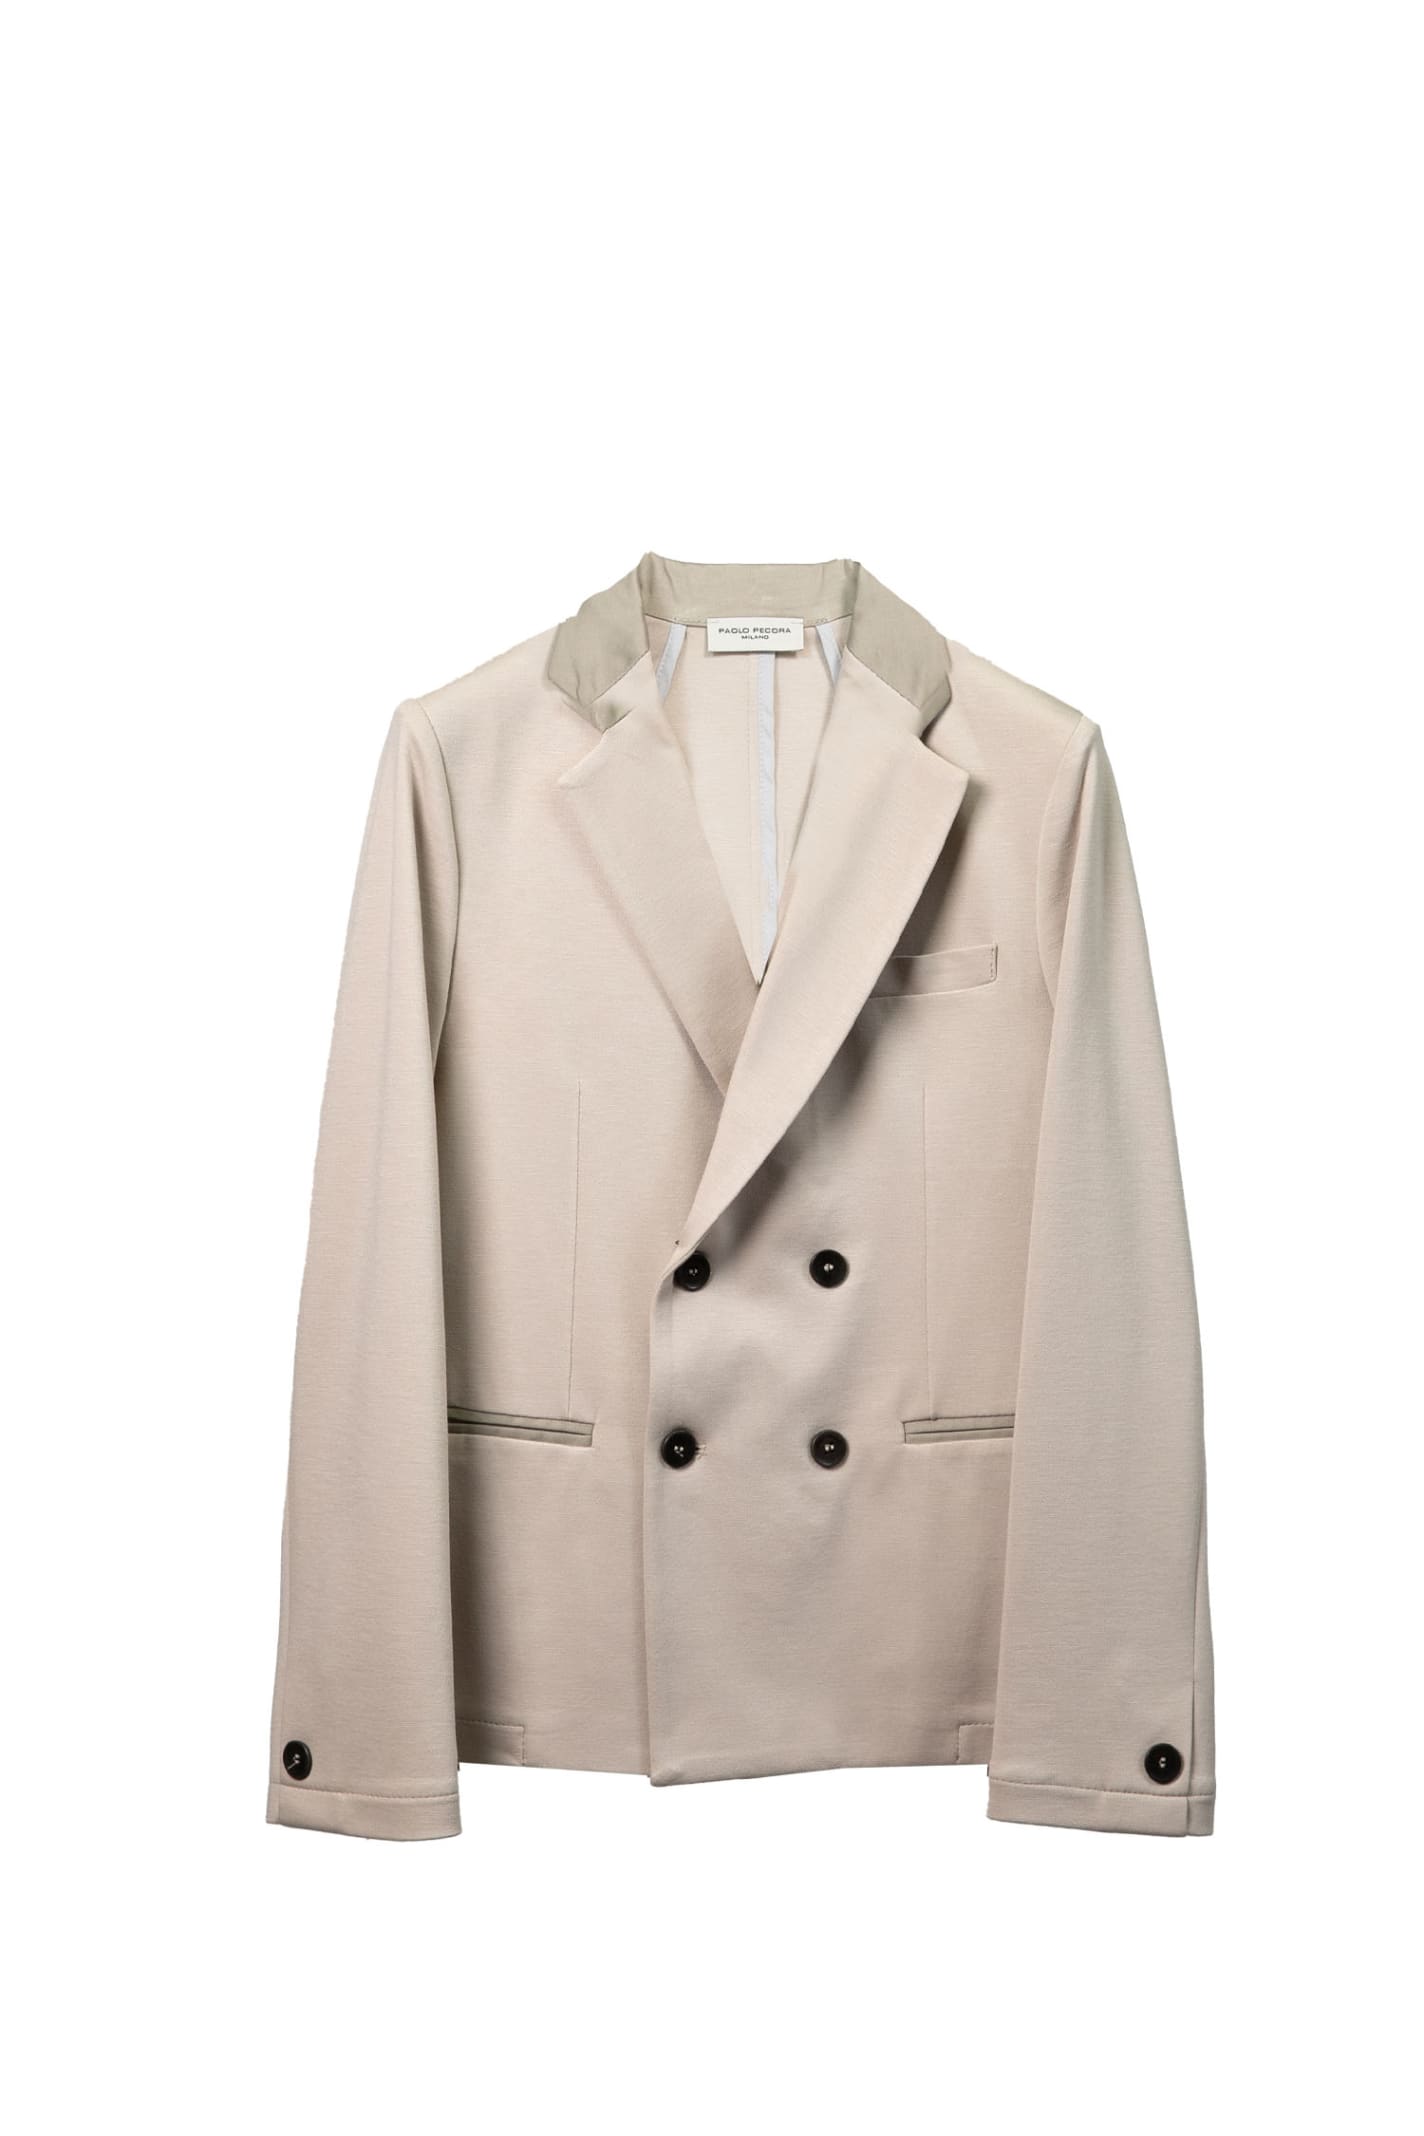 Paolo Pecora Kids' Double-breasted Jacket